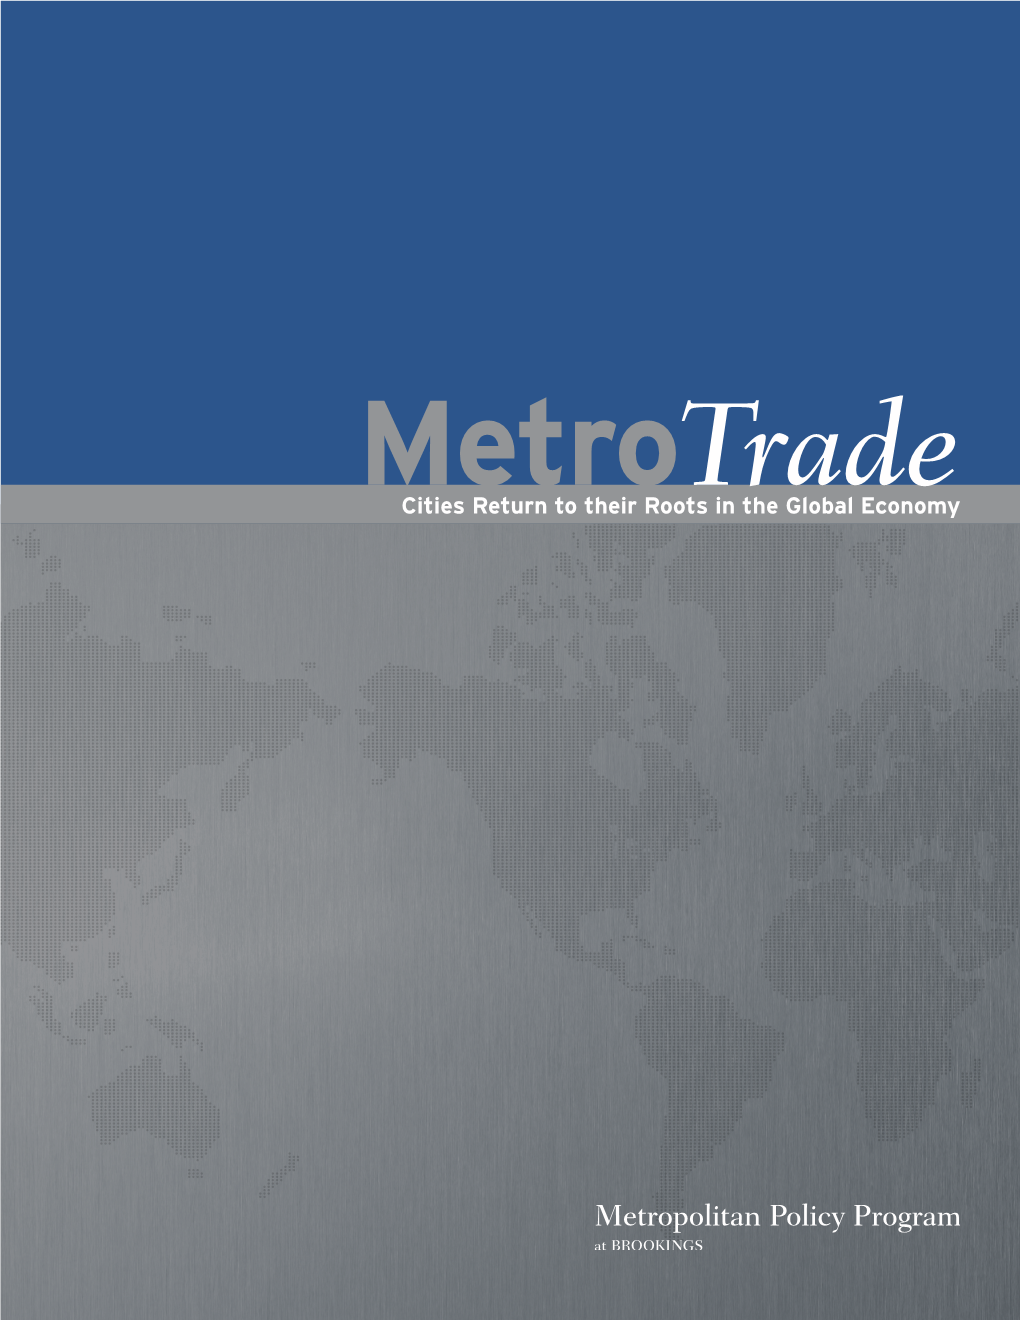 Metro Trade: Cities Return to Their Roots in the Global Economy 3 Introduction